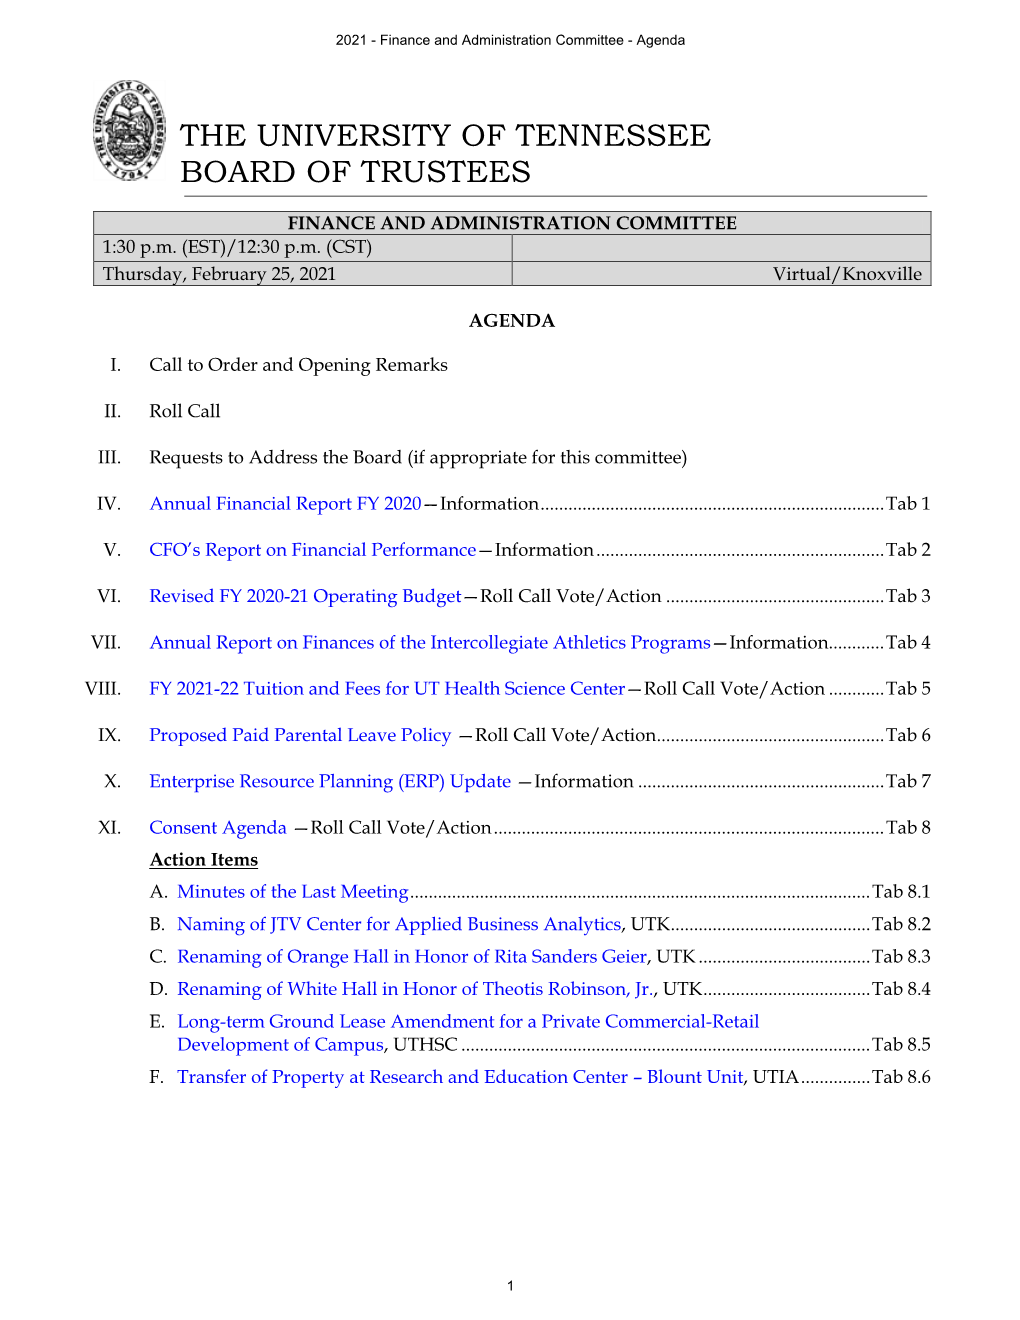 Finance and Administration Committee - Agenda